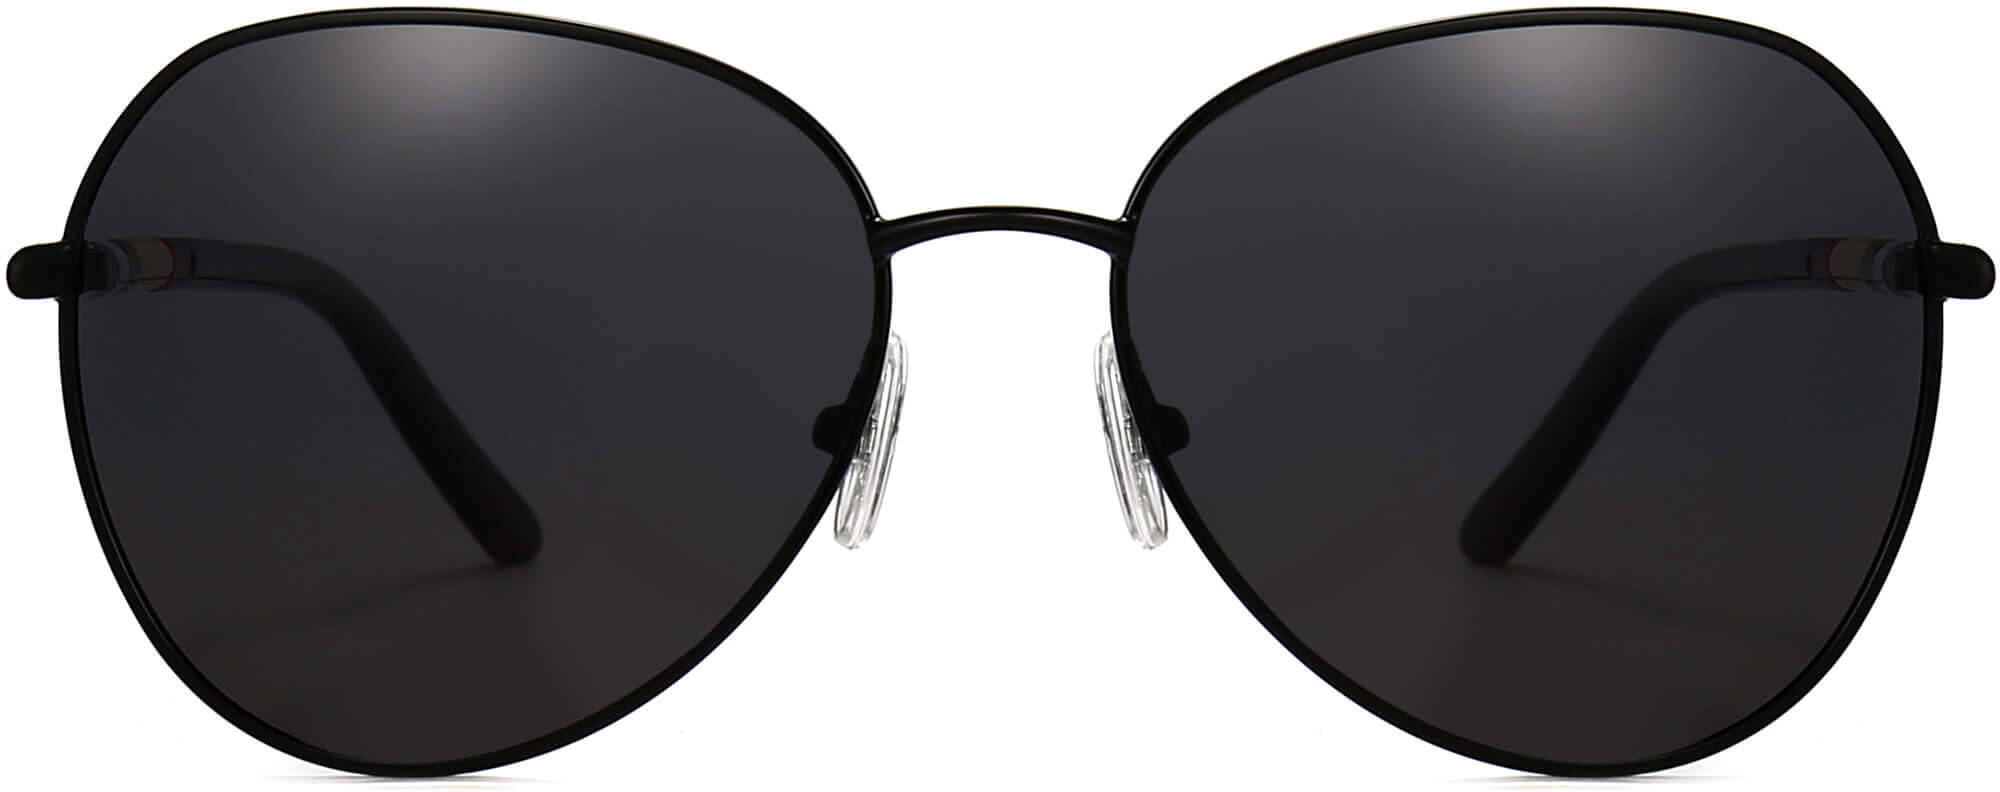 Joel Black Stainless steel Sunglasses from ANRRI, front view